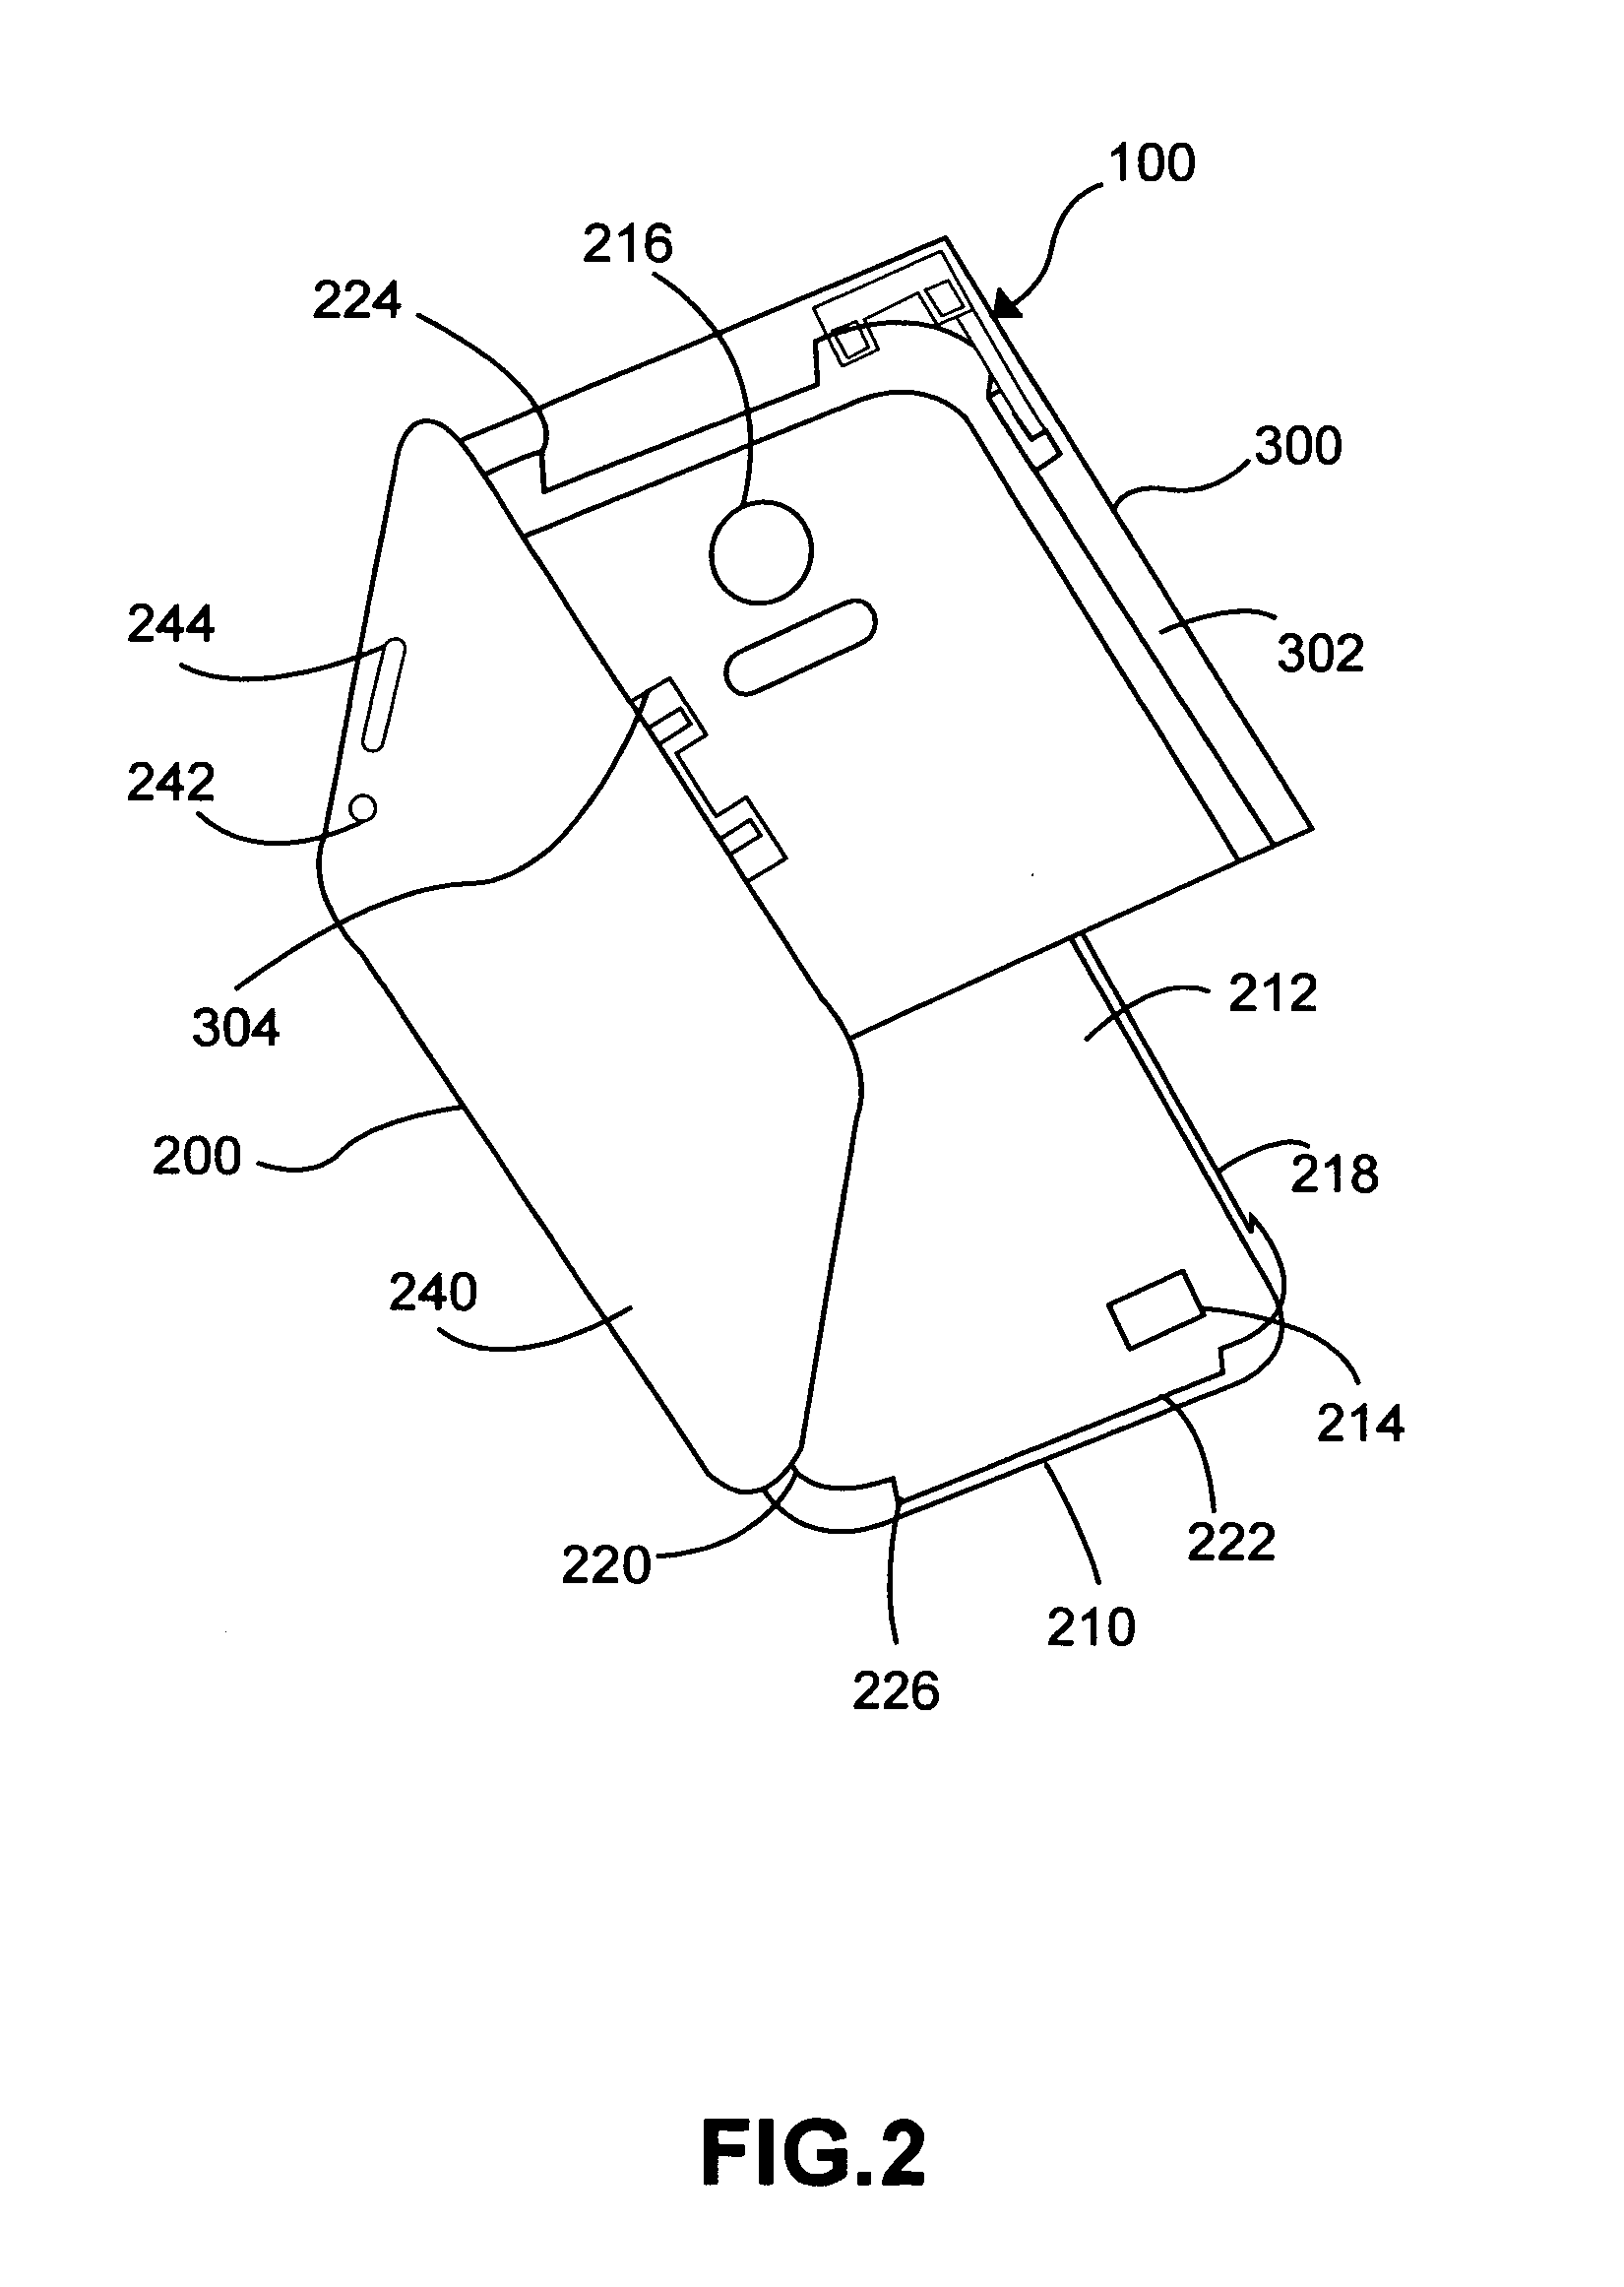 Phone case with built-in magnification device